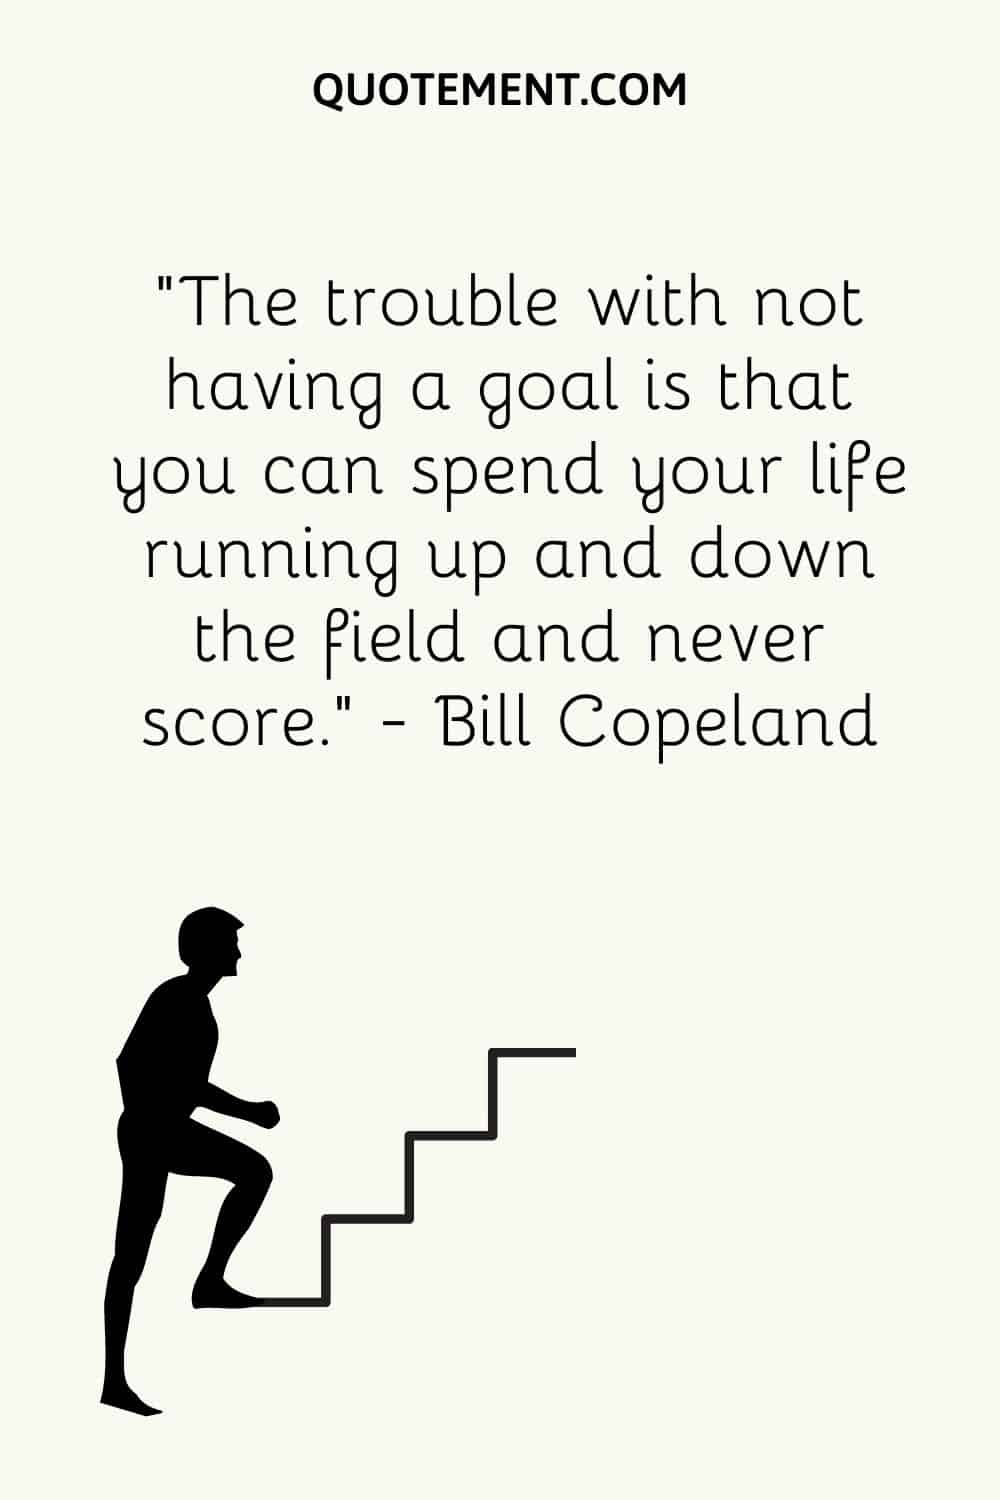 The trouble with not having a goal is that you can spend your life running up and down the field and never score